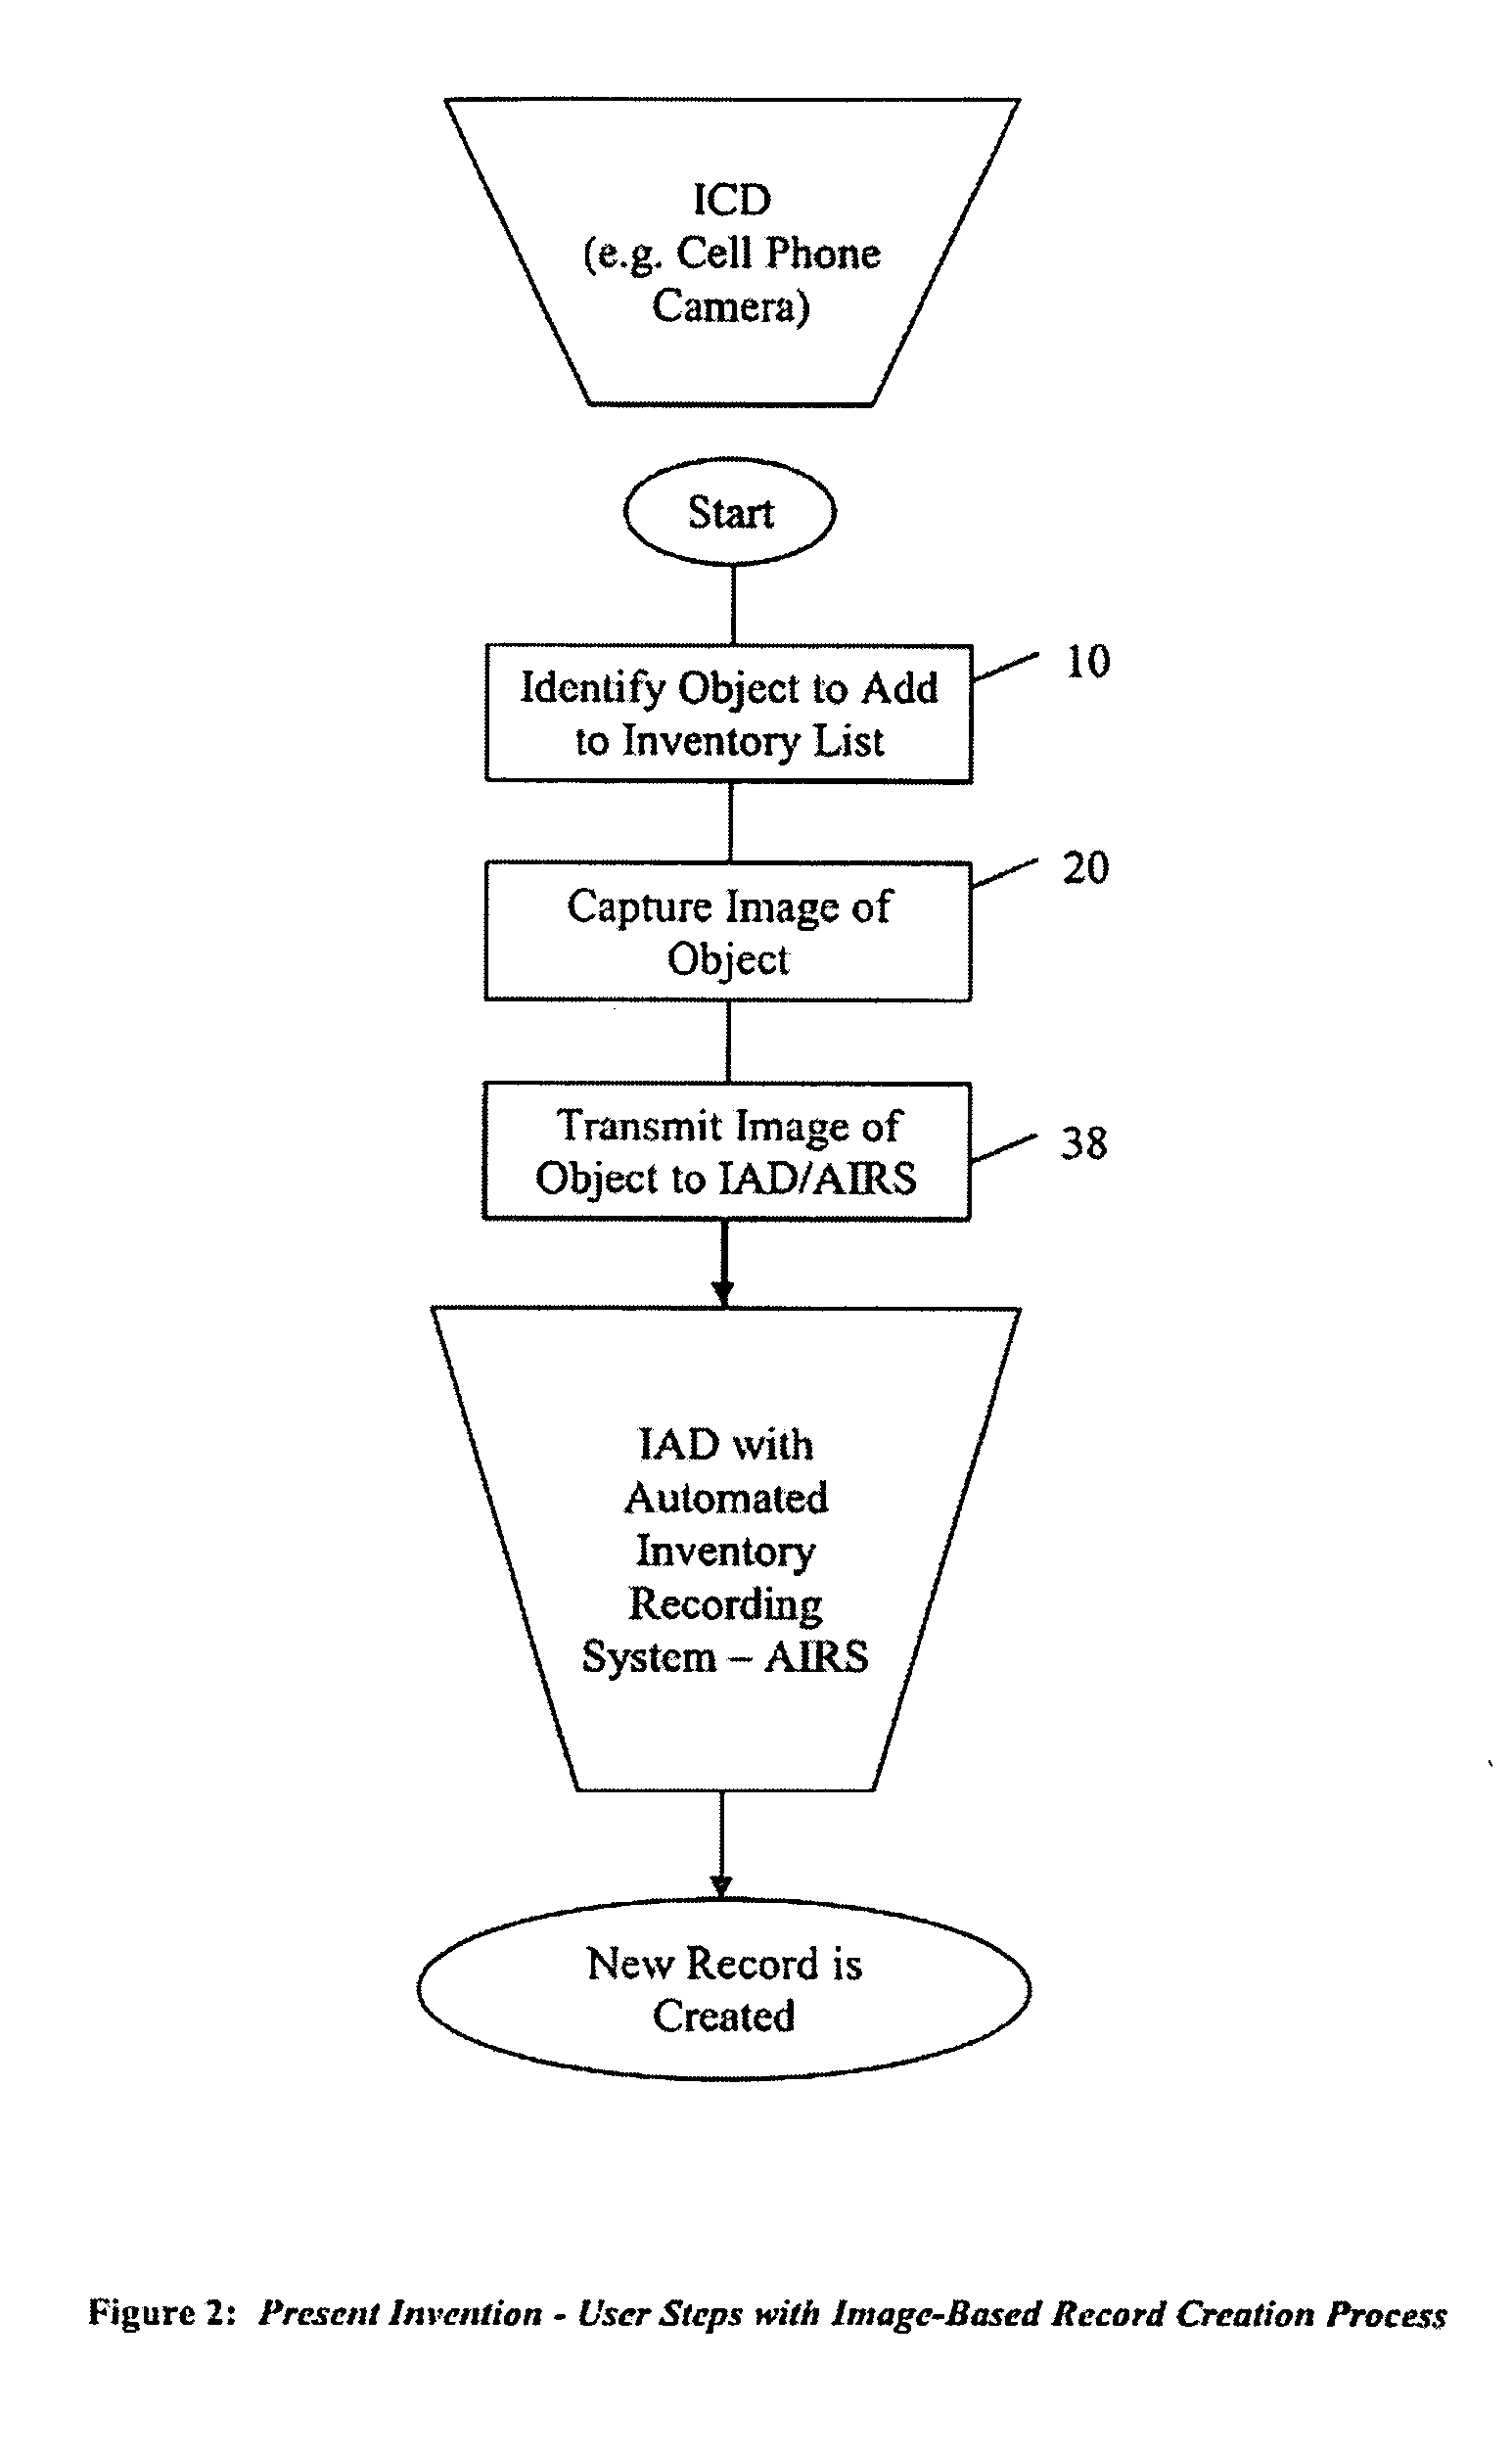 Method and Apparatus for Automated Record Creation Using Information Objects, Such as Images, Transmitted Over a Communications Network to Inventory Databases and Other Data-Collection Programs